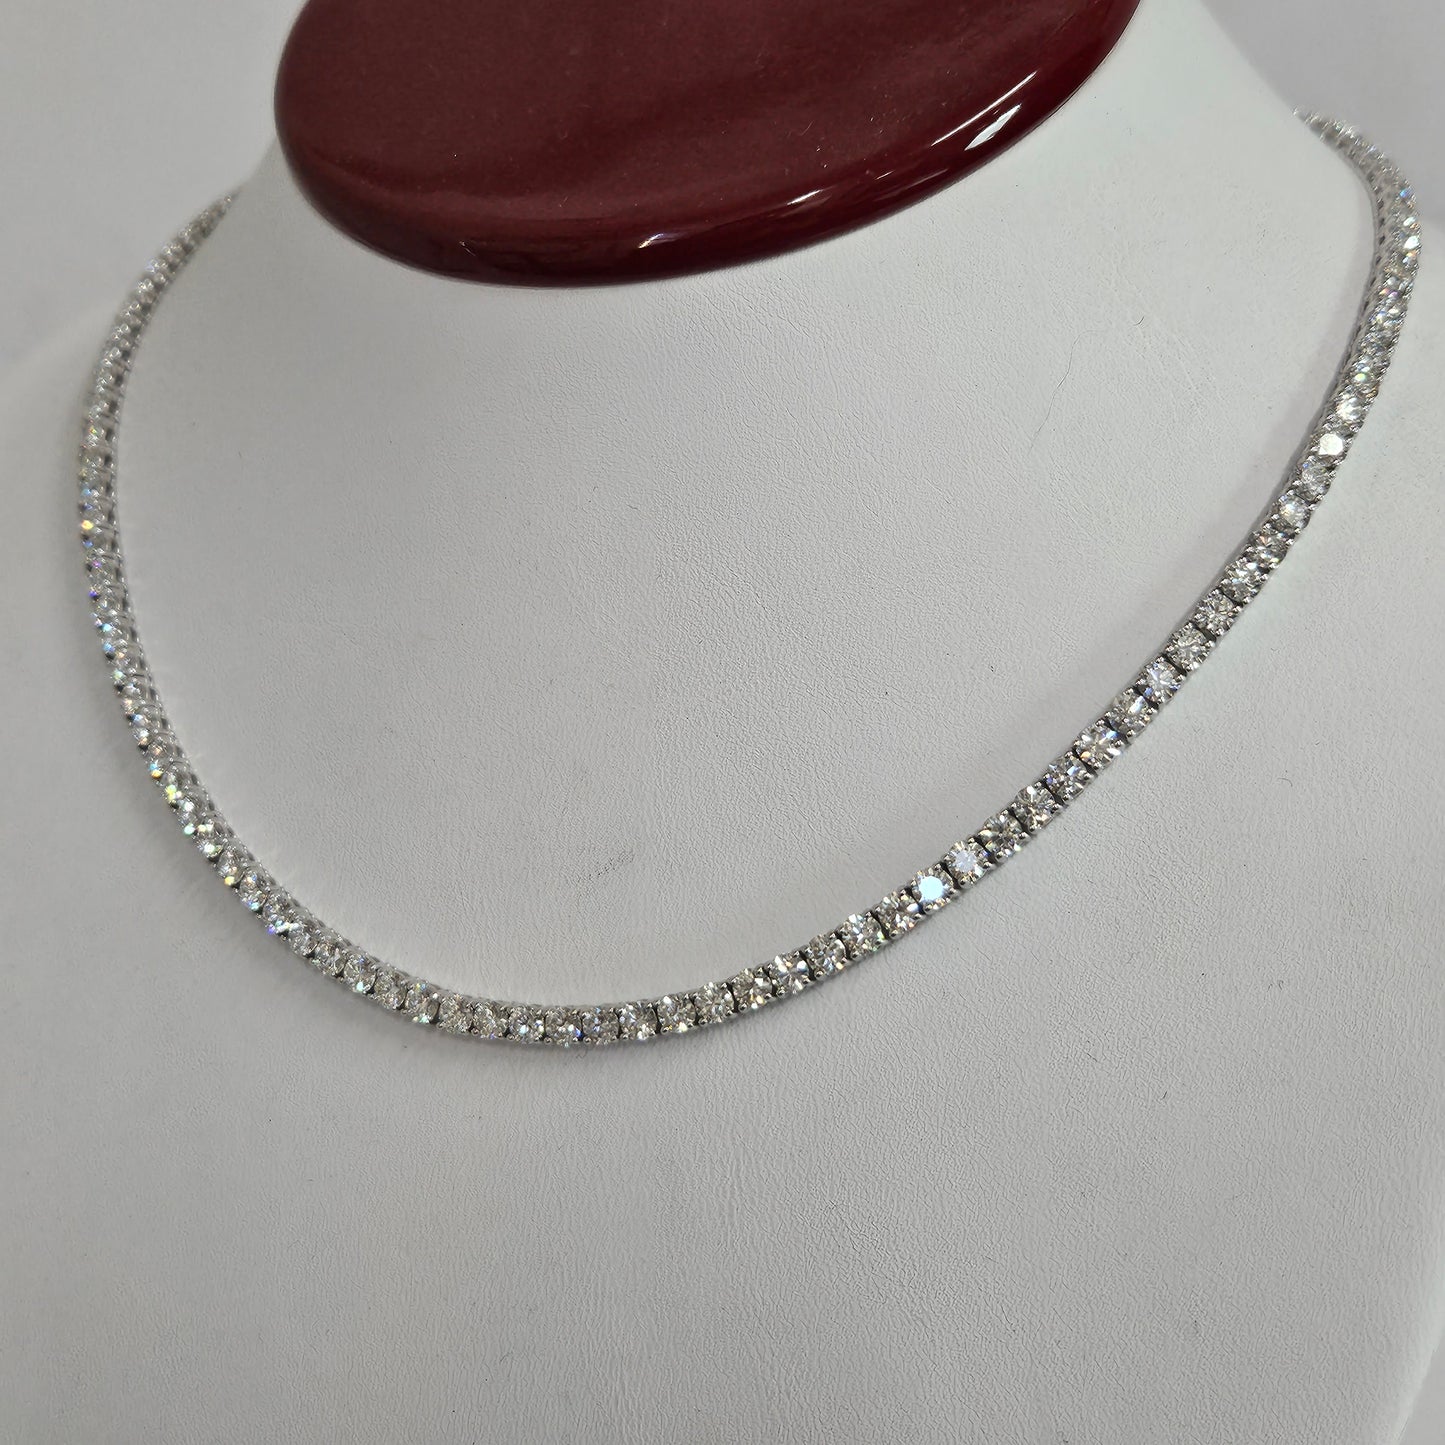 17ct Diamond Tennis Necklace/Natural Round Diamond Tennis Necklace/Diamond Engagement Necklace/Four prong Tennis Necklace/Anniversary Gift